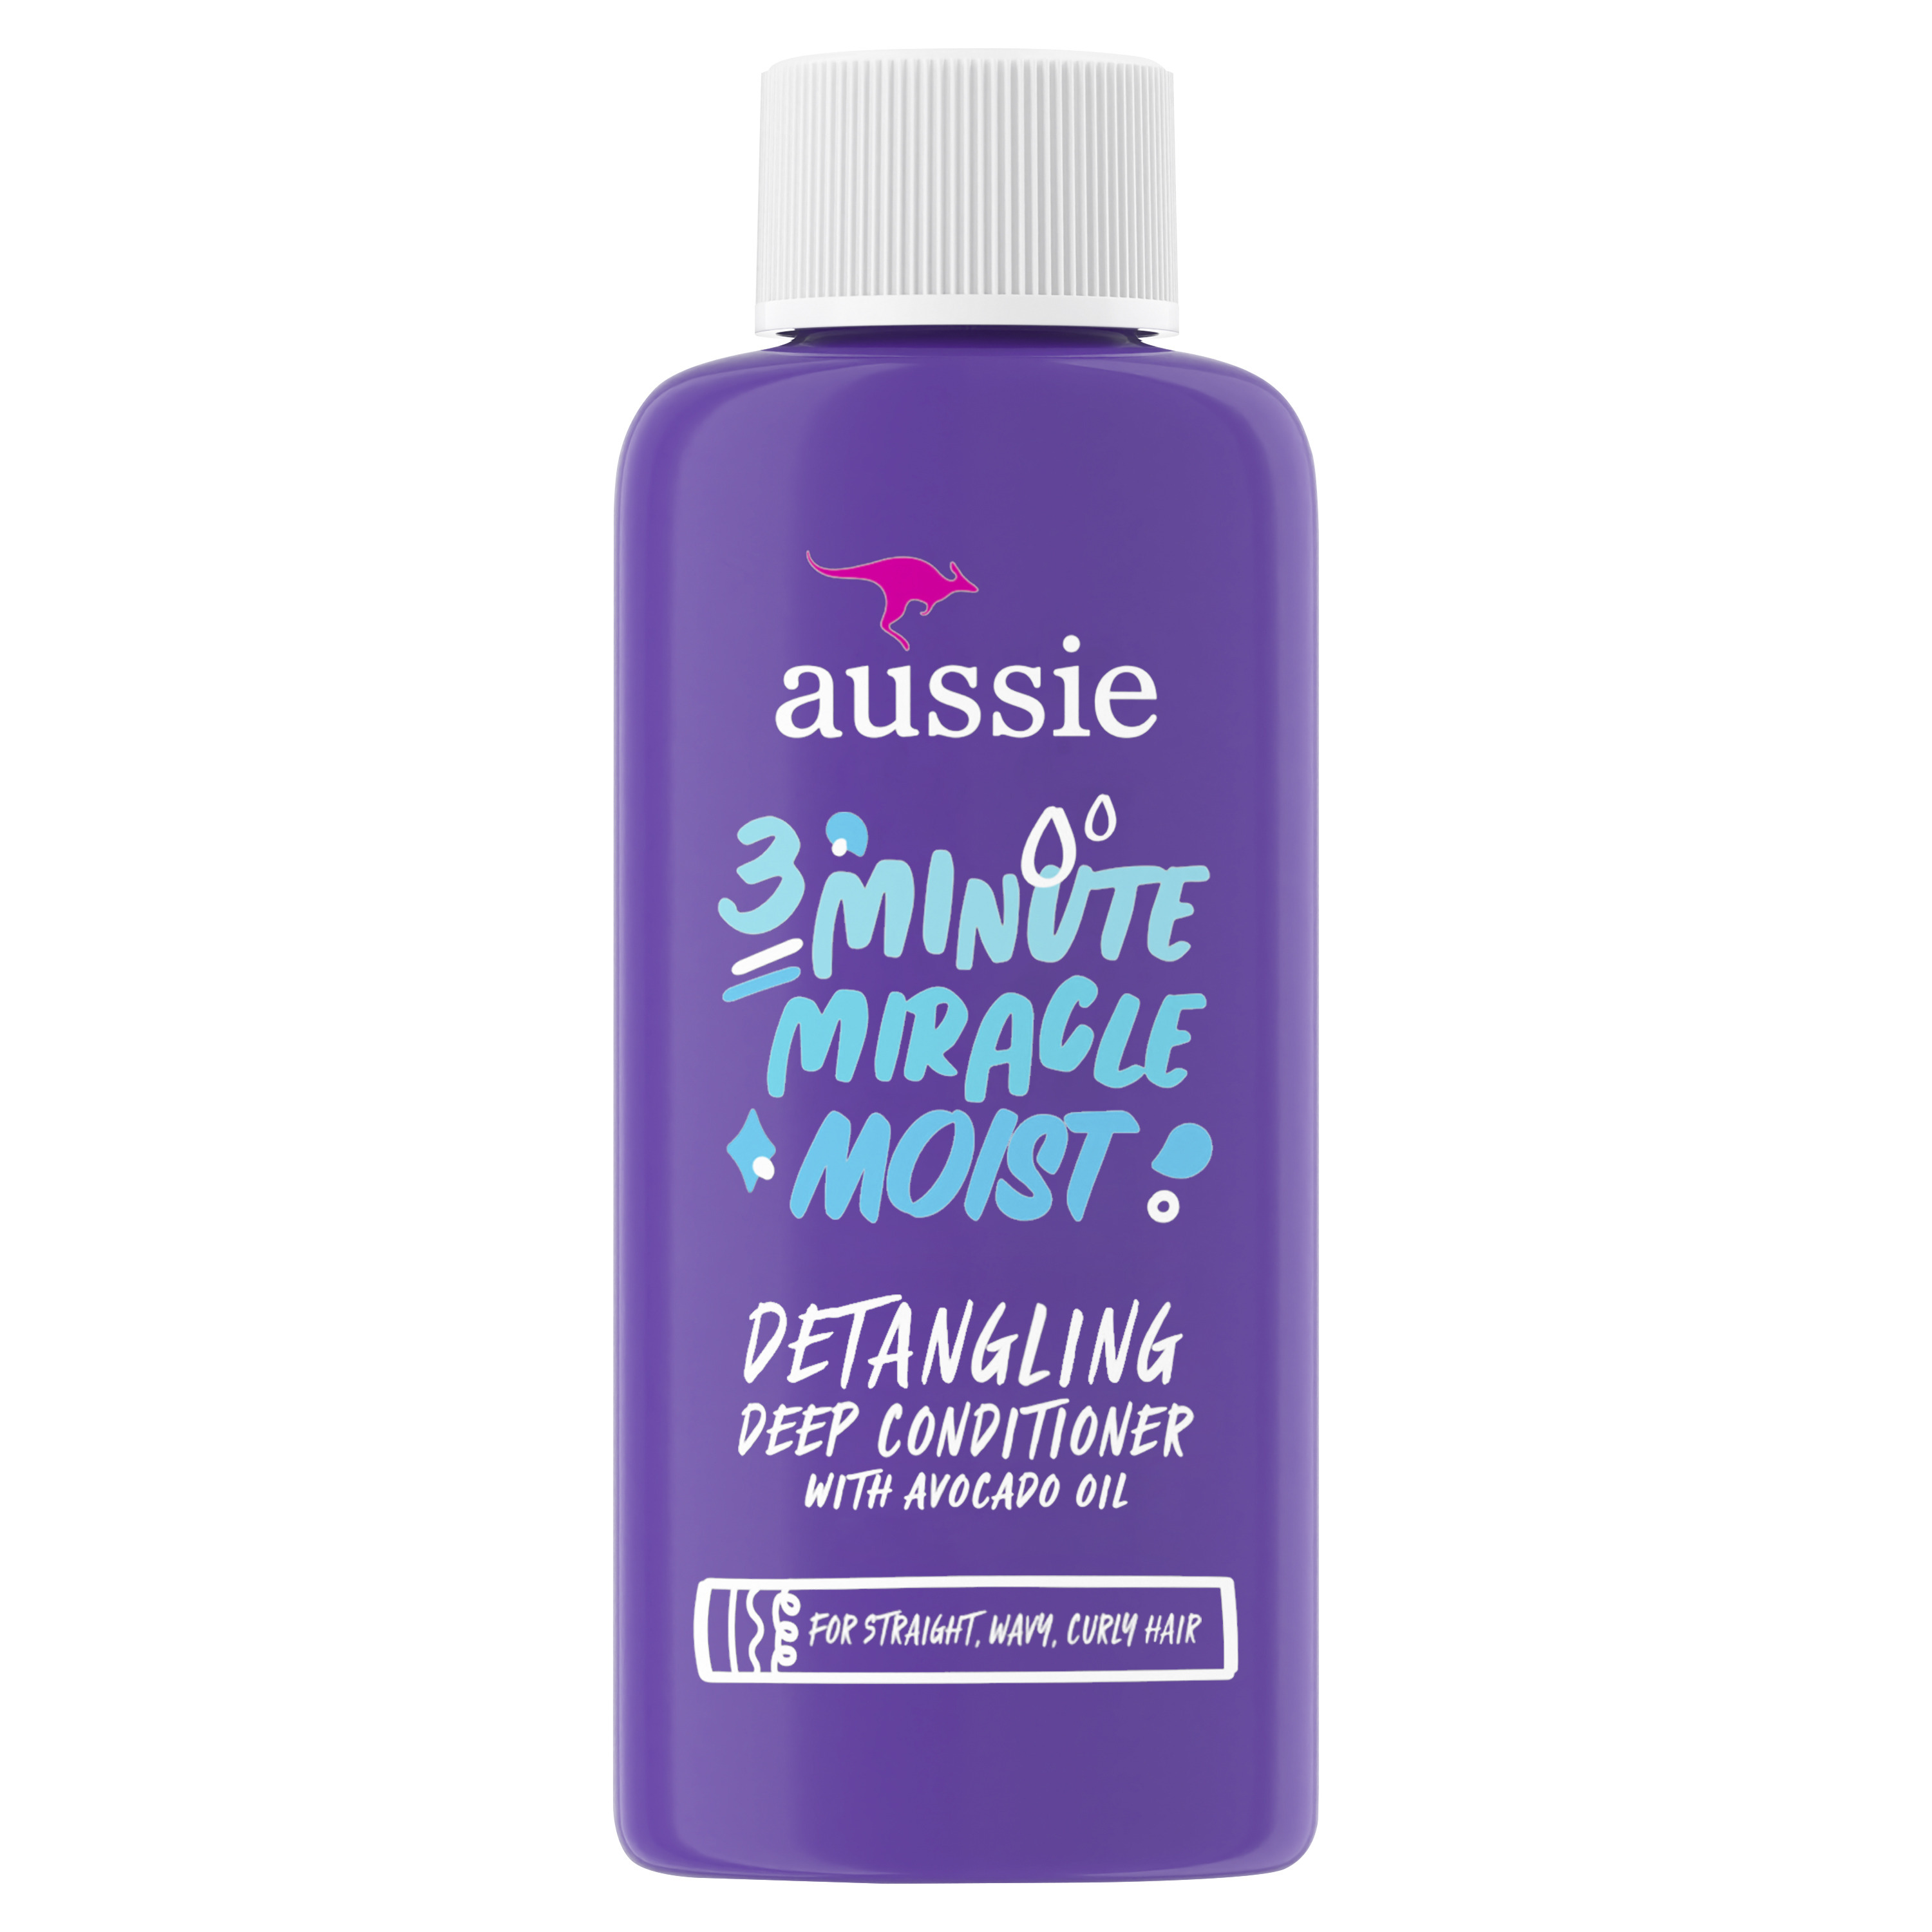 Aussie Miracle Moist 3 Minute Miracle Deep Conditioner with Avocado, Paraben Free, For All Hair Types 1.7 fl oz - image 1 of 12